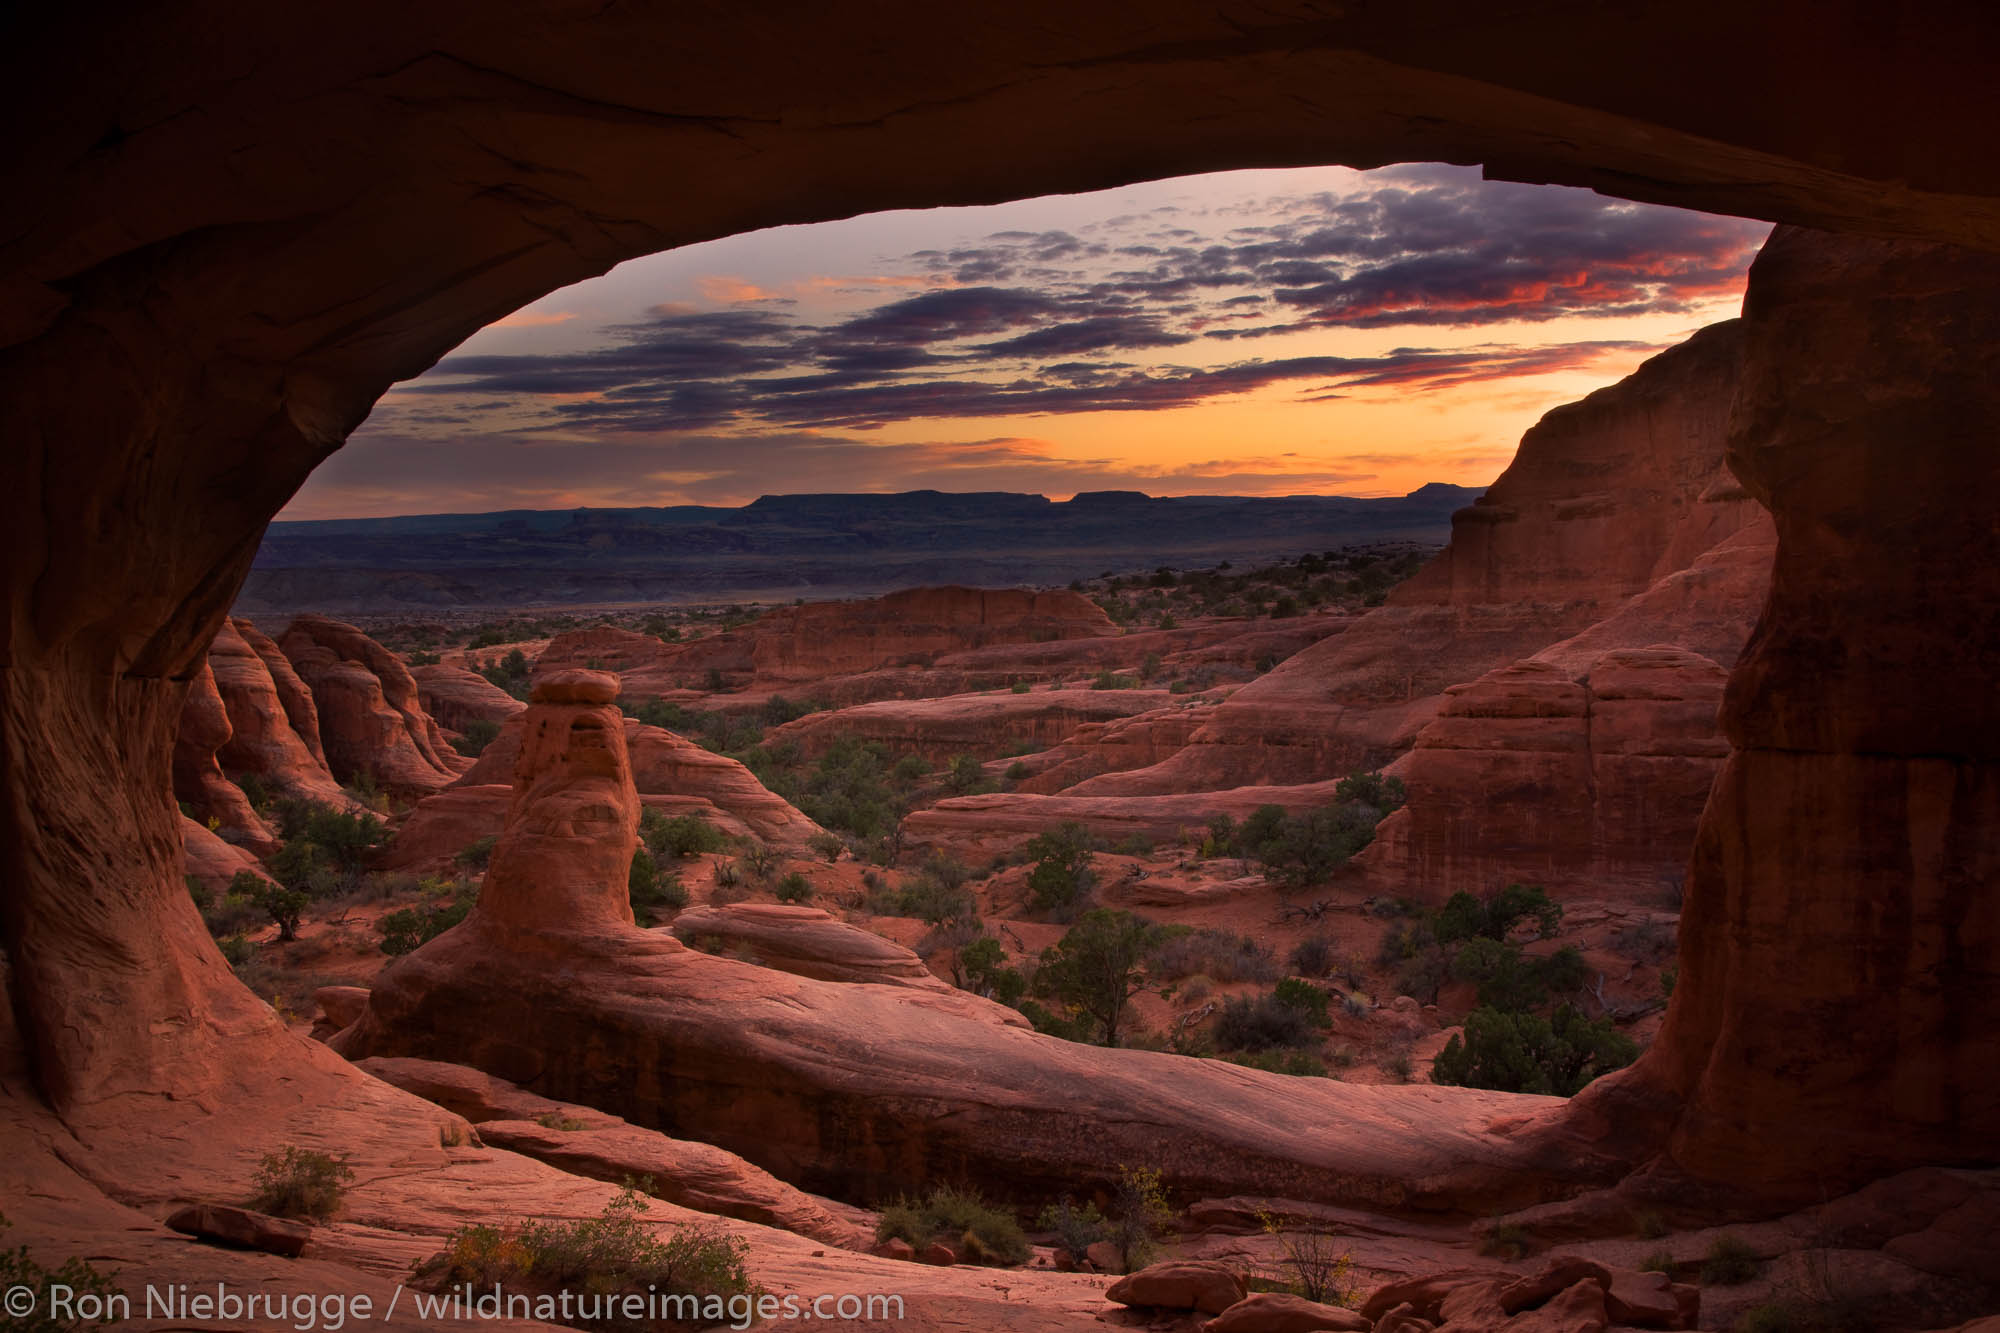 Tower Arch at sunset, Klondike Bluffs area, Arches National Park, near Moab, Utah.